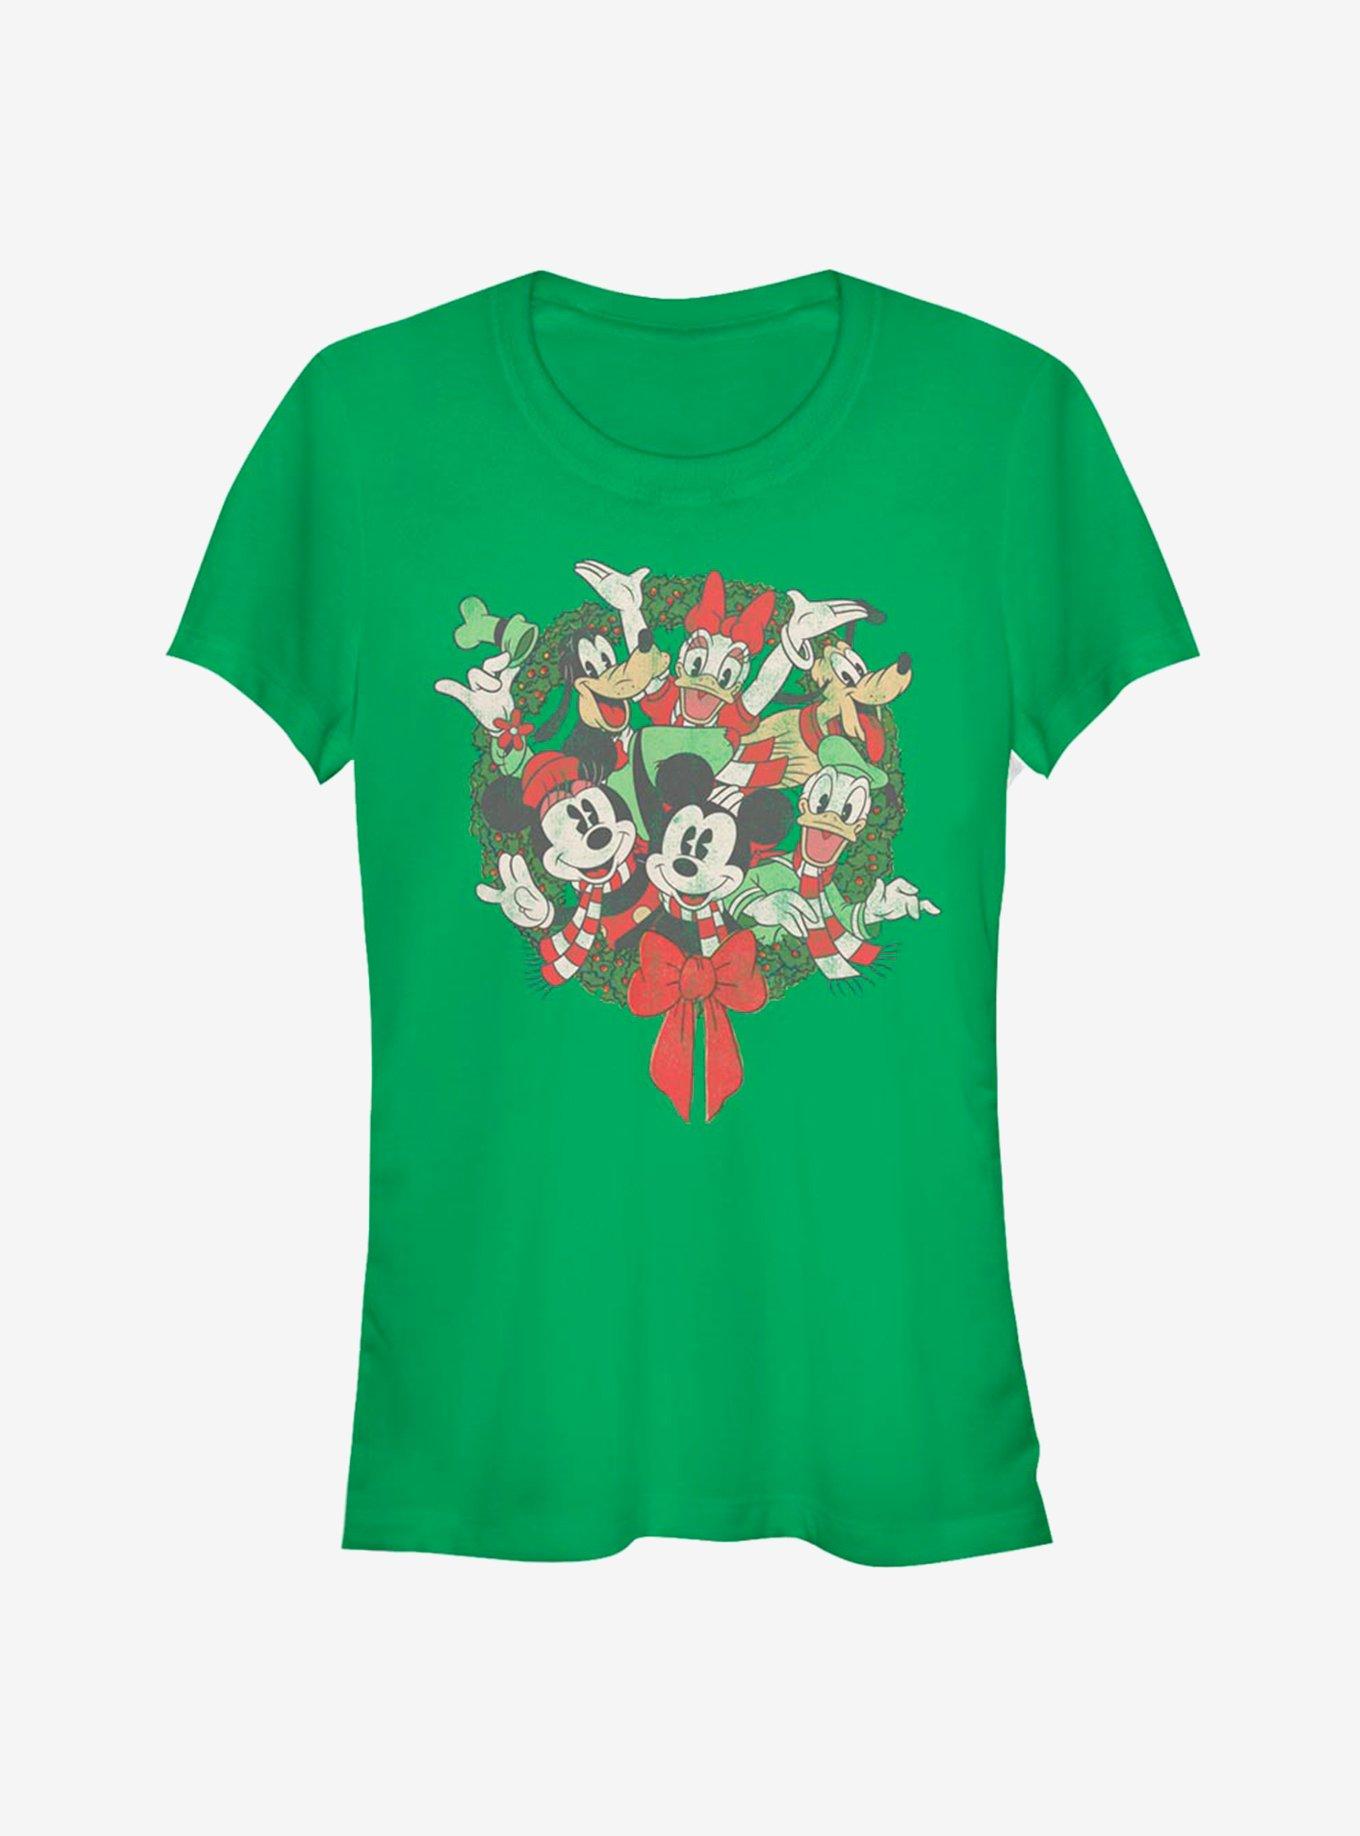 Disney Mickey Mouse & Friends Holiday Wreath Classic Girls T-Shirt, KELLY, hi-res